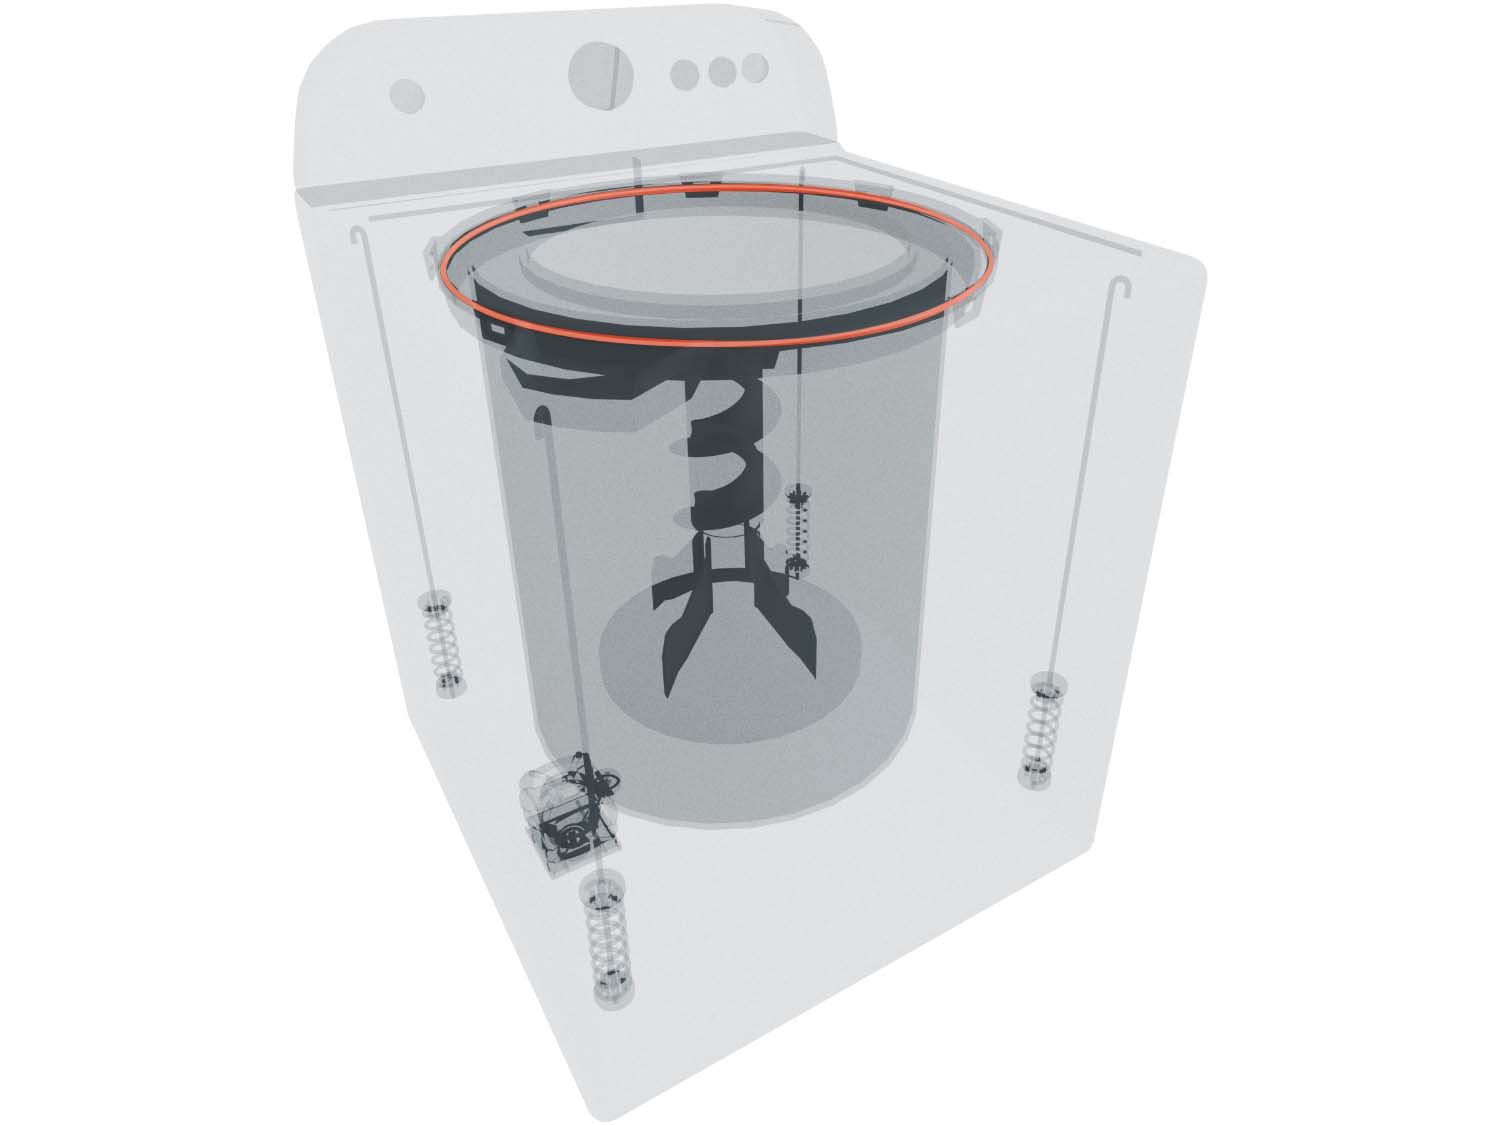 A 3D diagram showing the components of a washer and specifying the location of the tub ring gasket